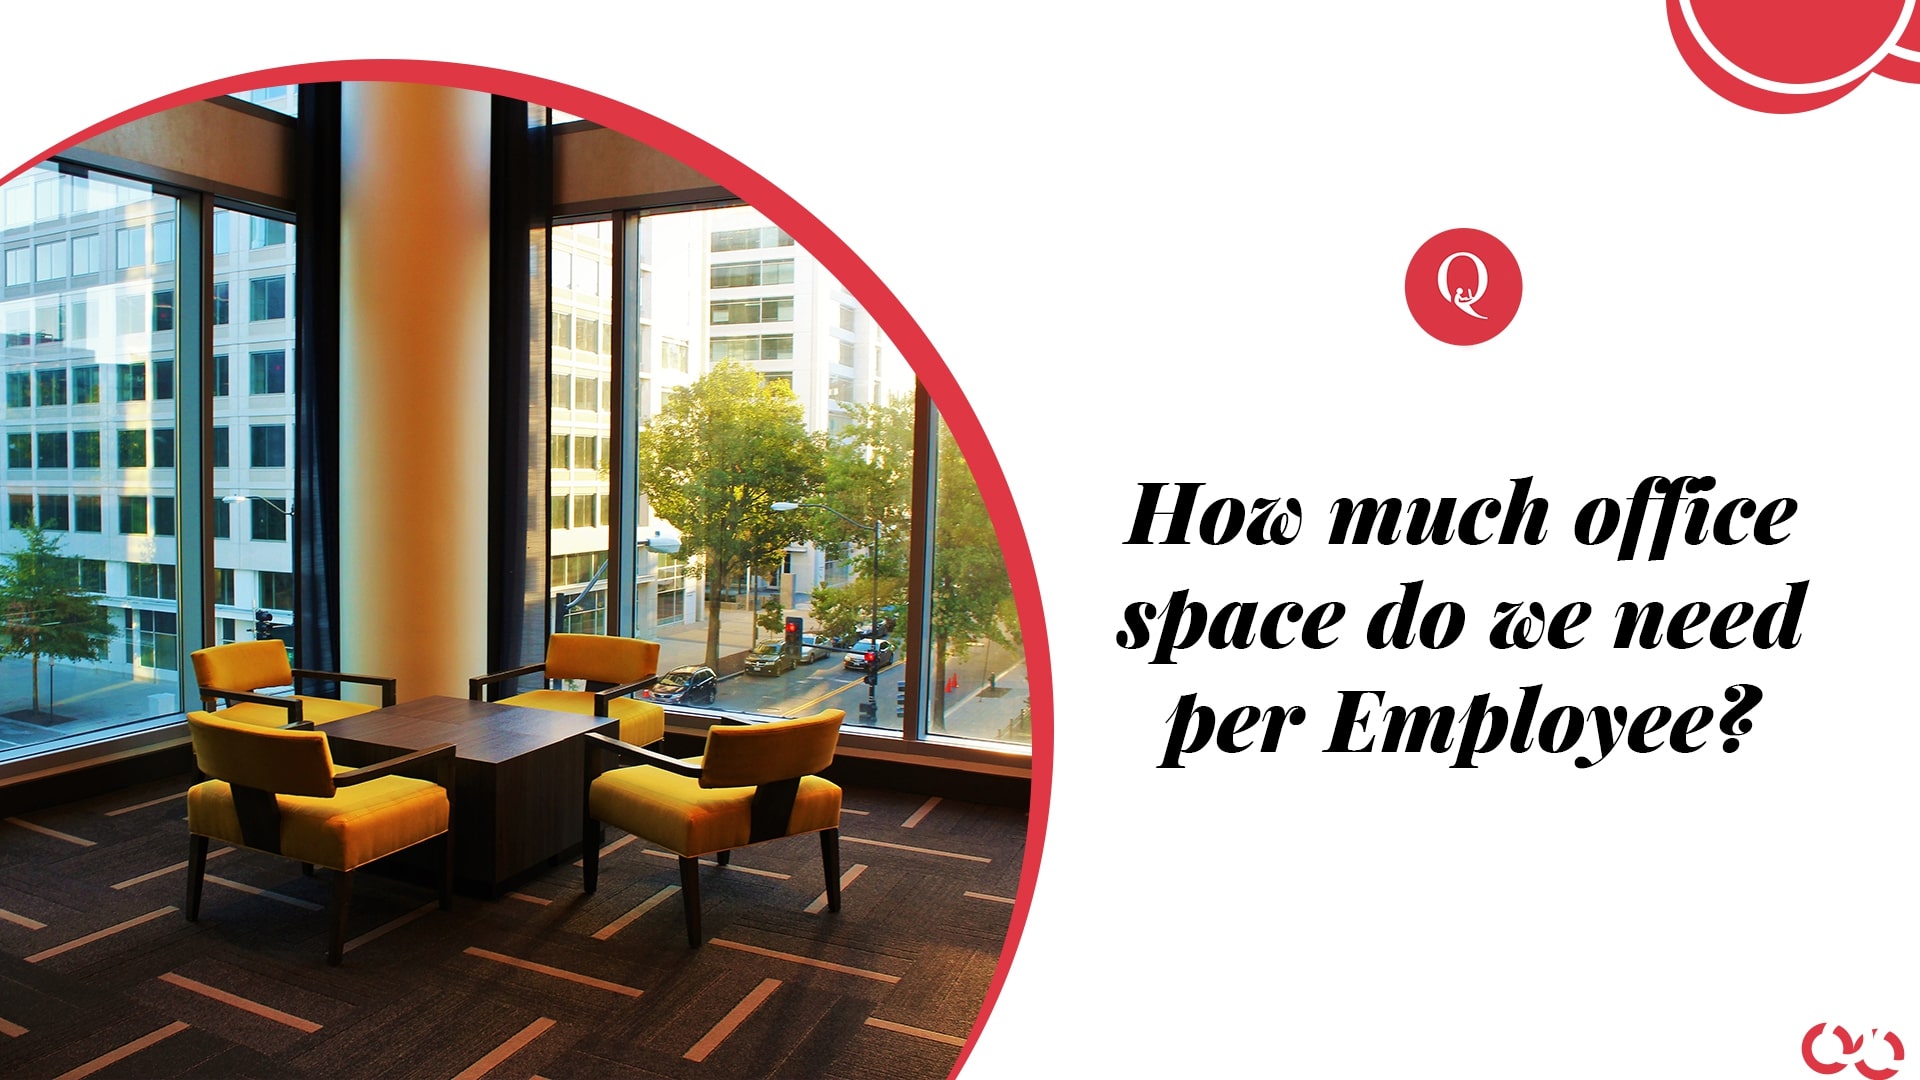 How Much Office Space Do We Need Per Employee? - Industry insights